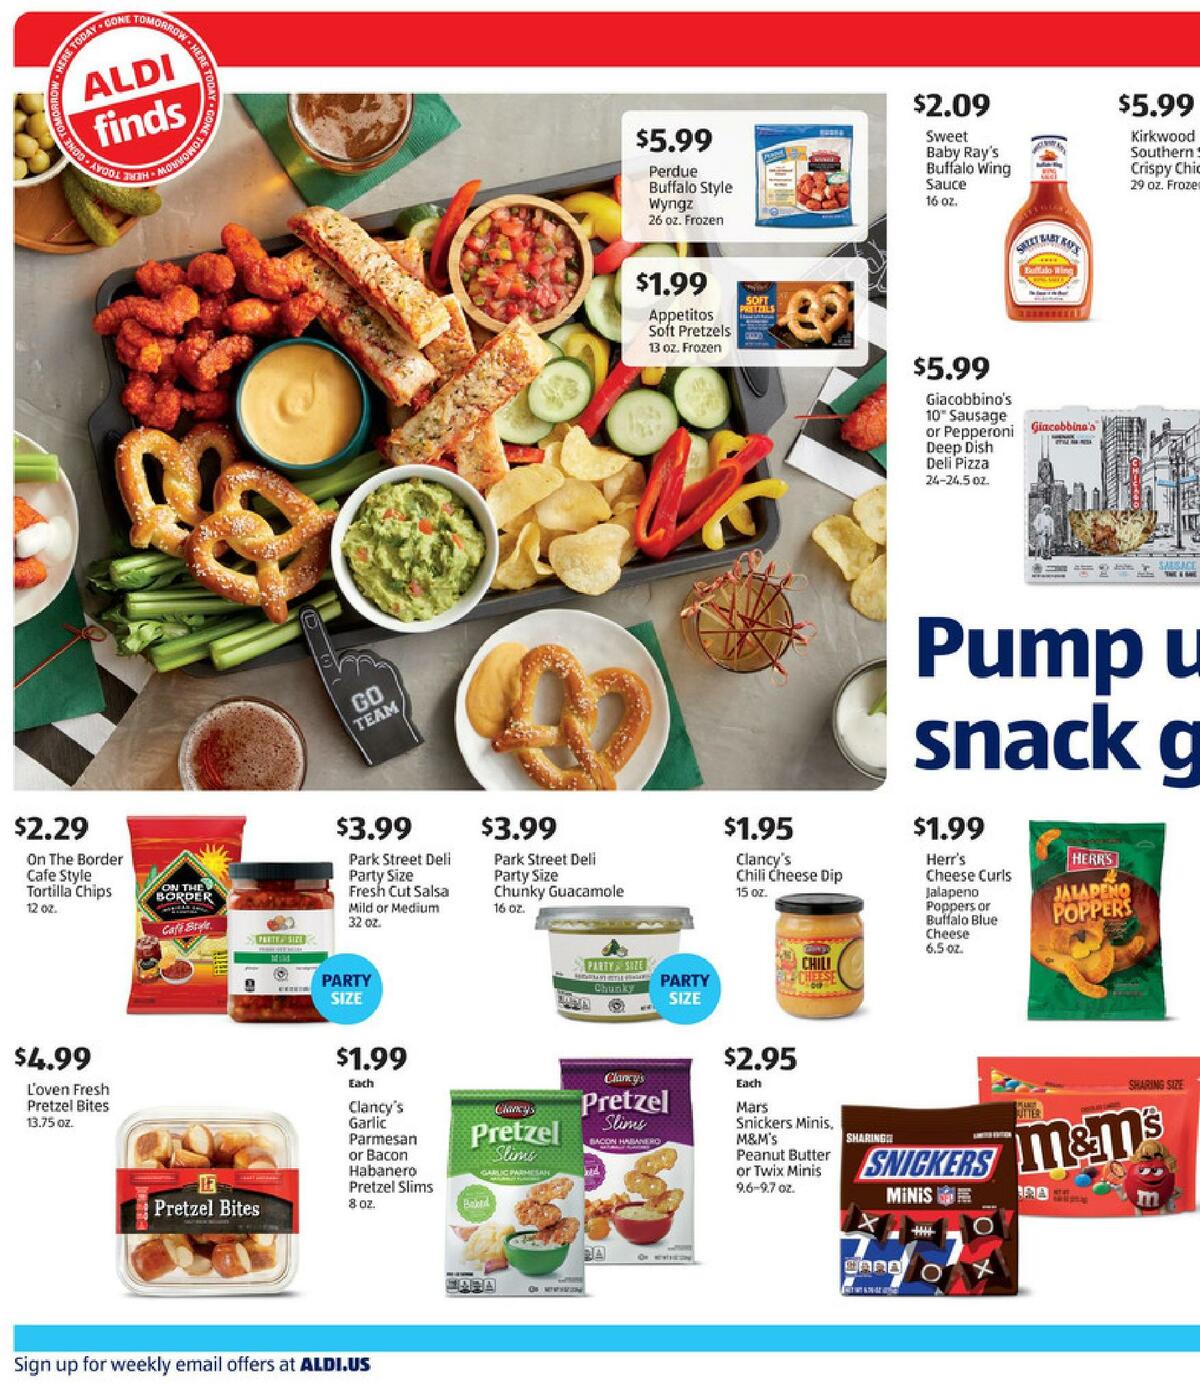 ALDI In Store Ad Weekly Ad from January 17